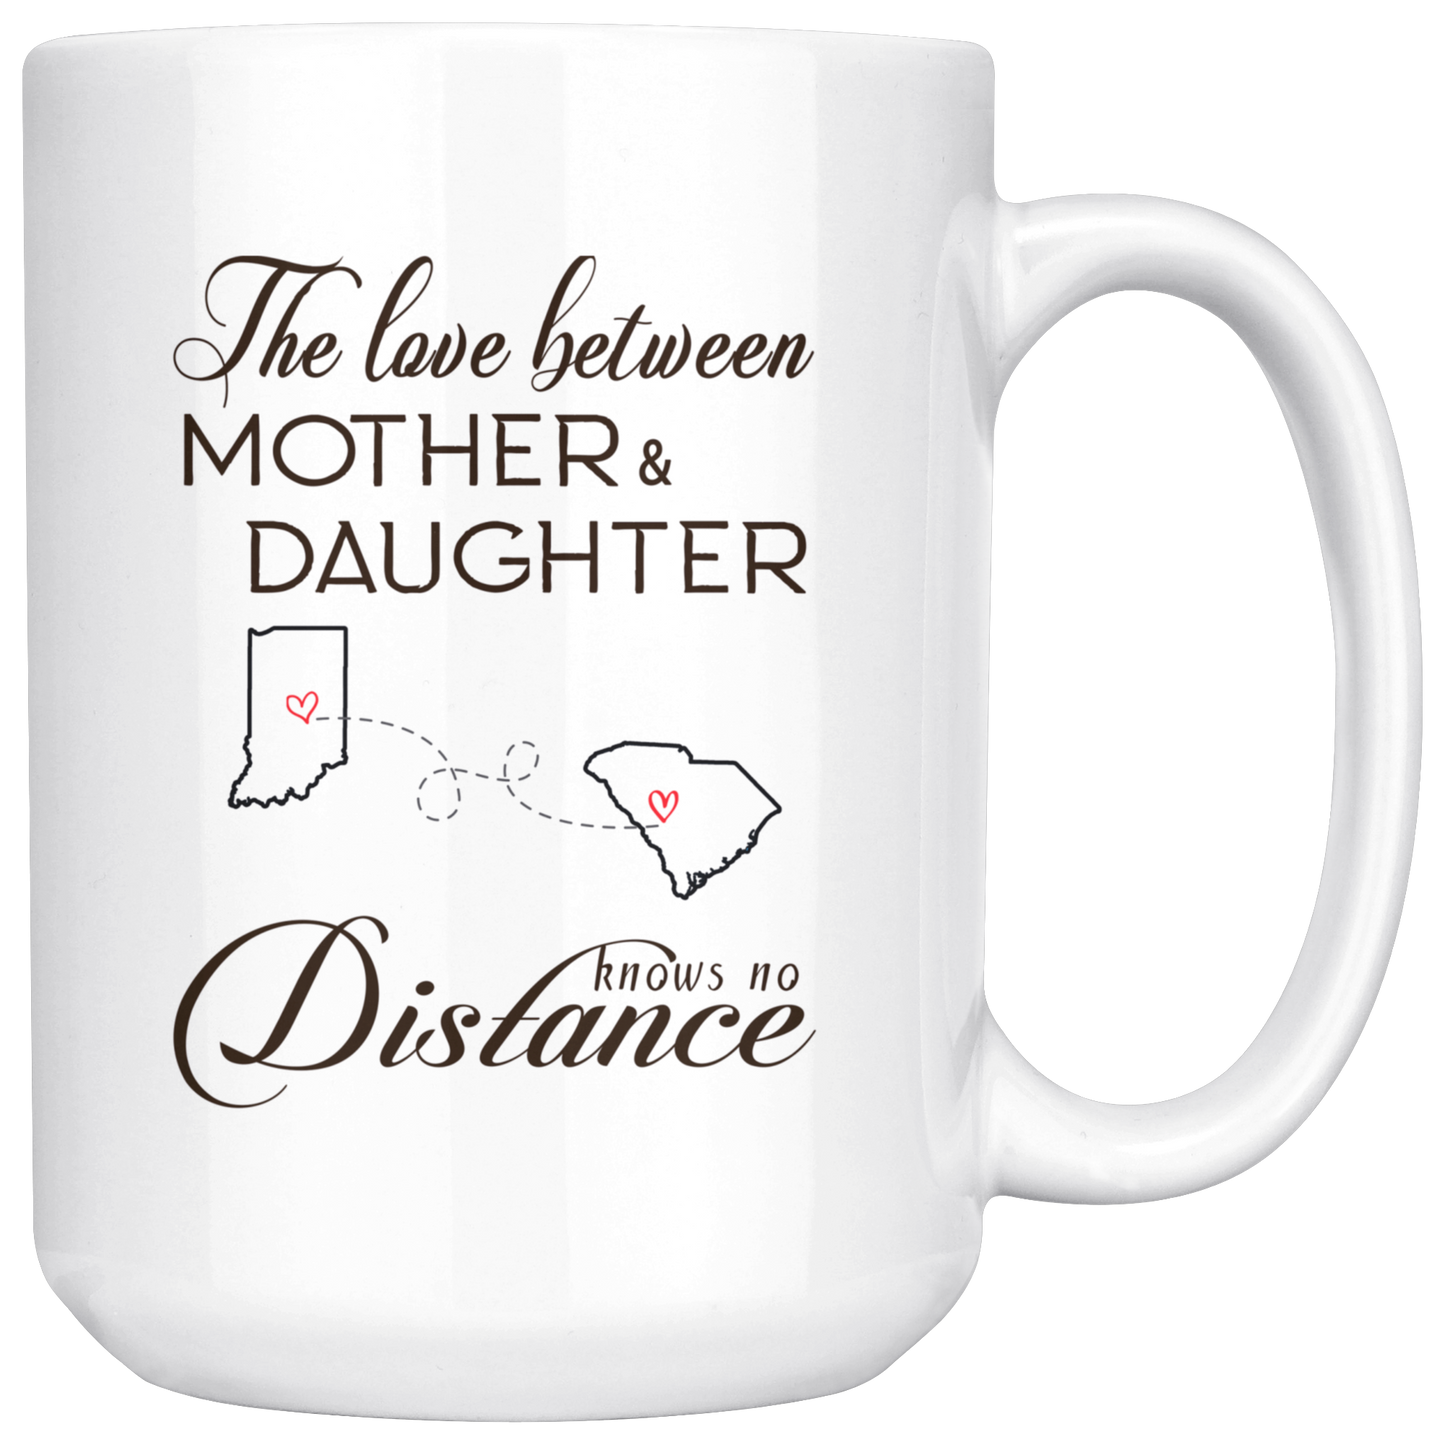 ND20604535-15oz-sp-23641 - [ Indiana | South Carolina | Mother And Daughter ]Personalized Long Distance State Coffee Mug - The Love Betwe